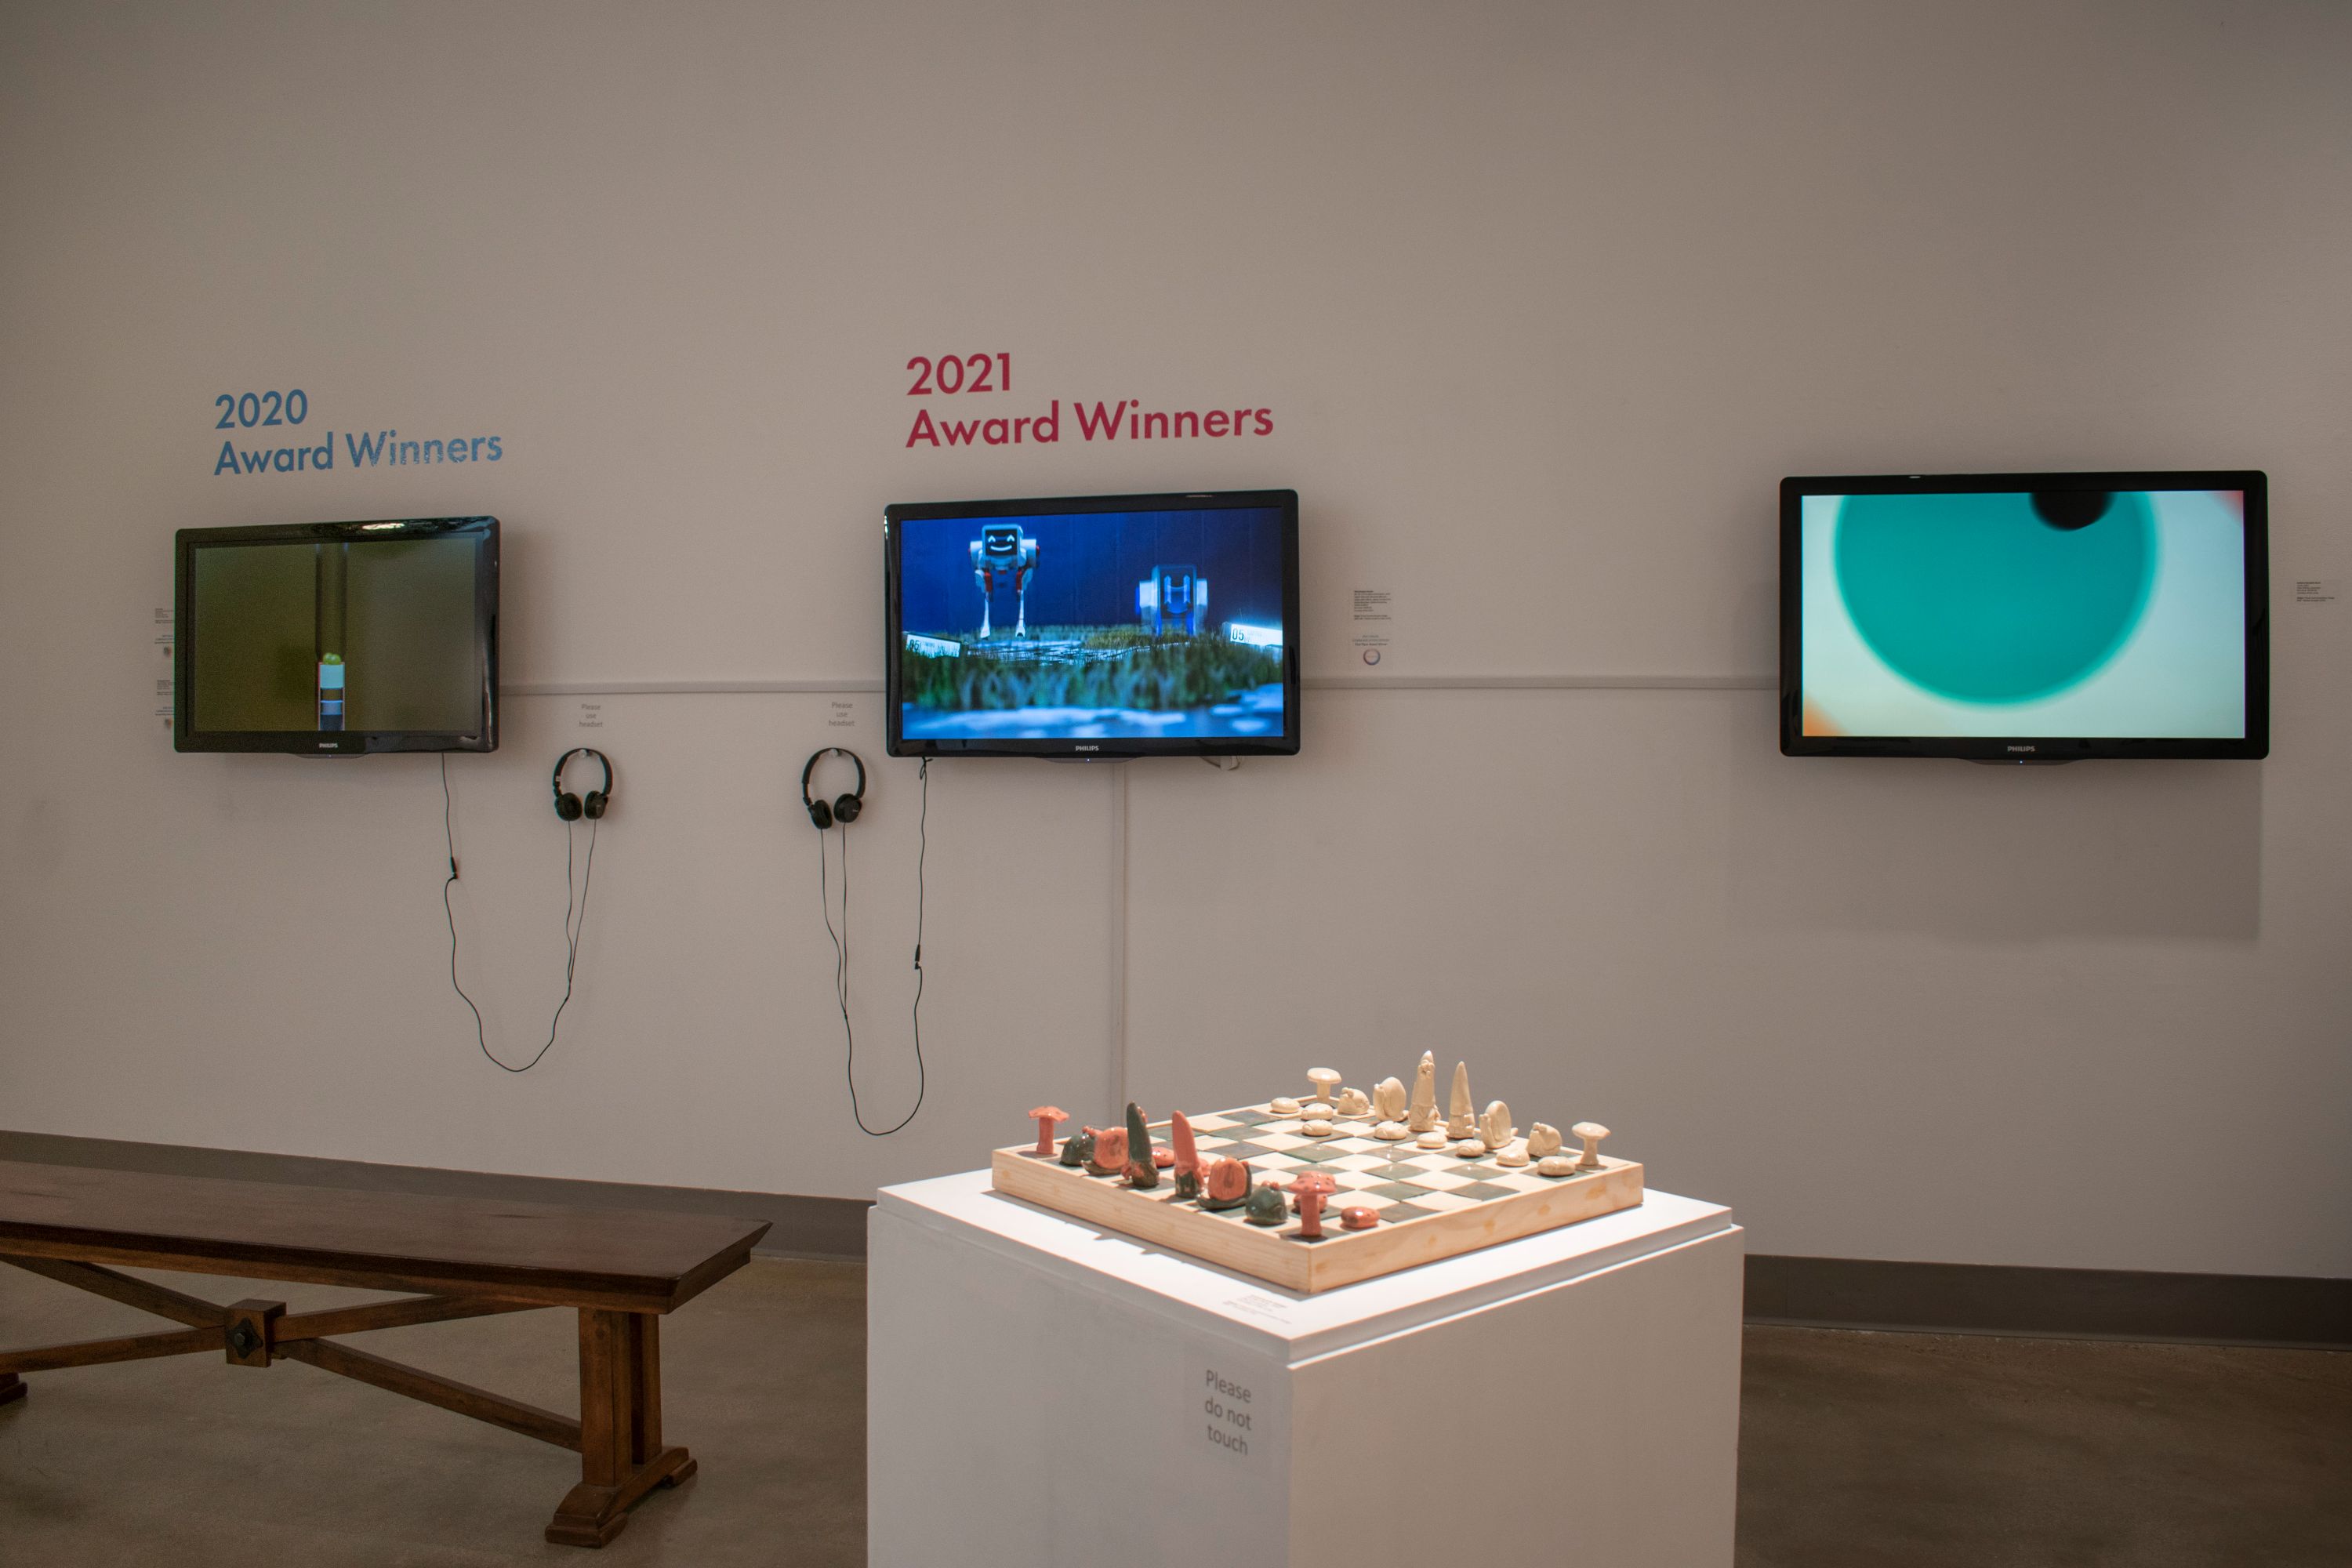 Installation View, Front East Gallery, Poly Kroma 2022 Exhibition, April 28, 2022 to May 22, 2022